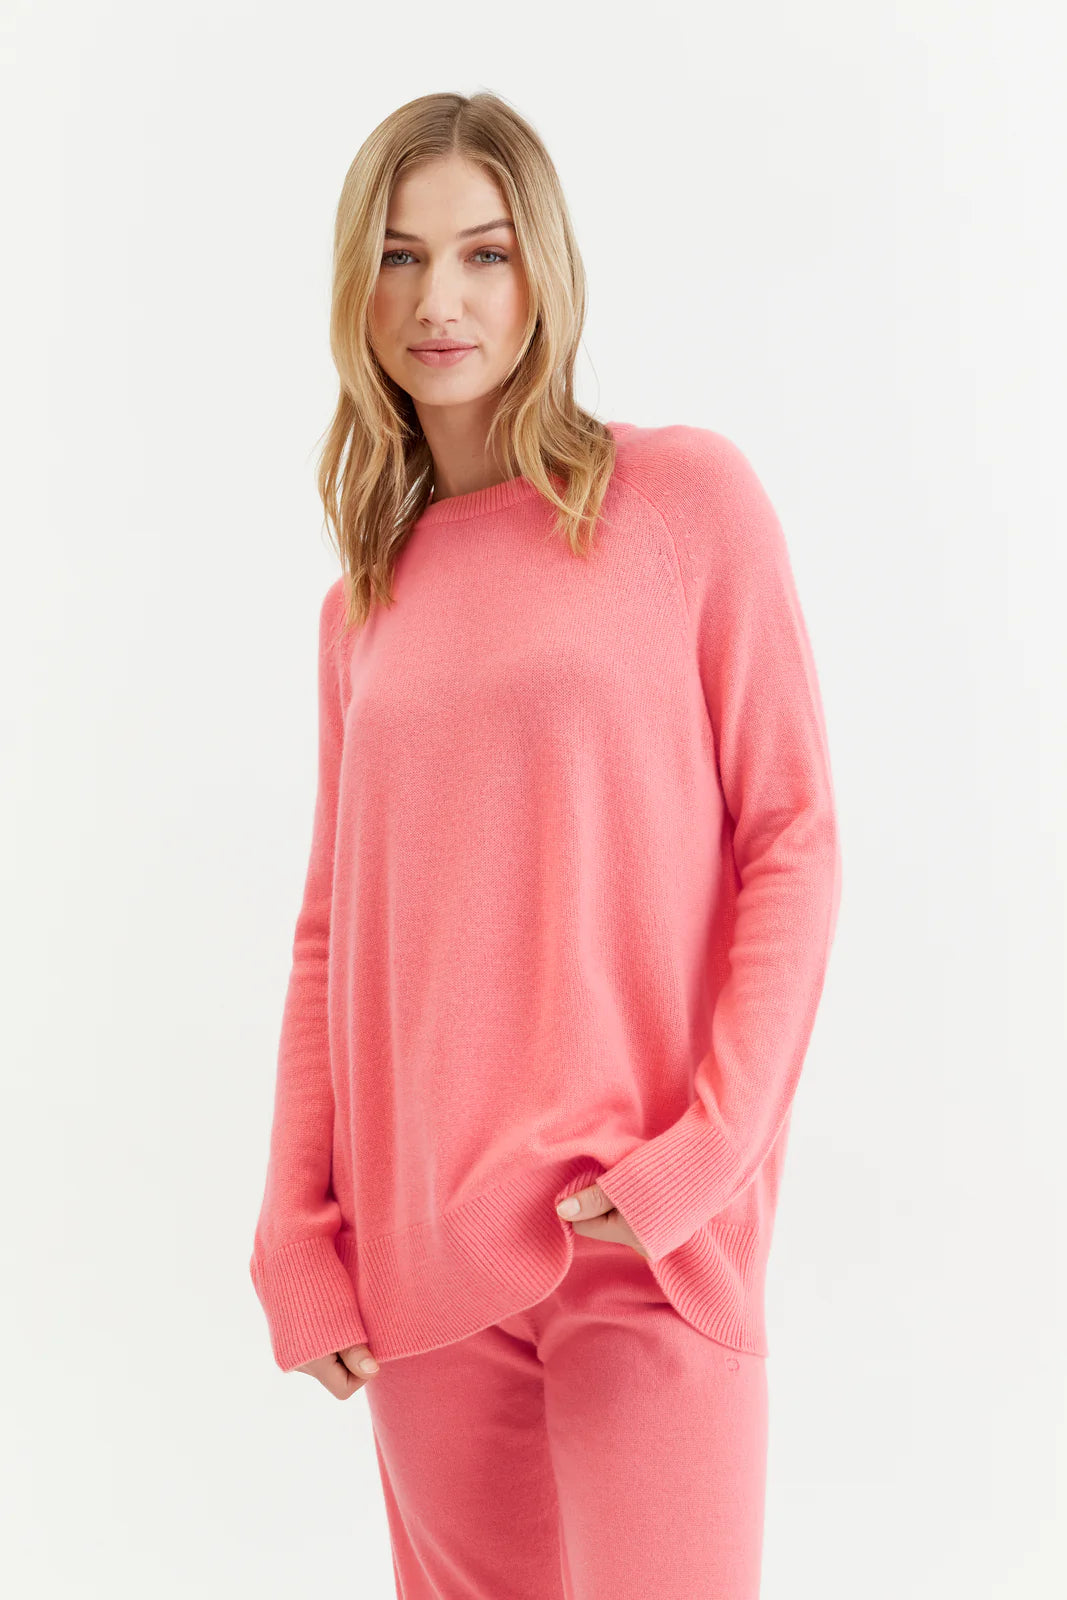 Summer Slouchy Cashmere Sweater - Coral